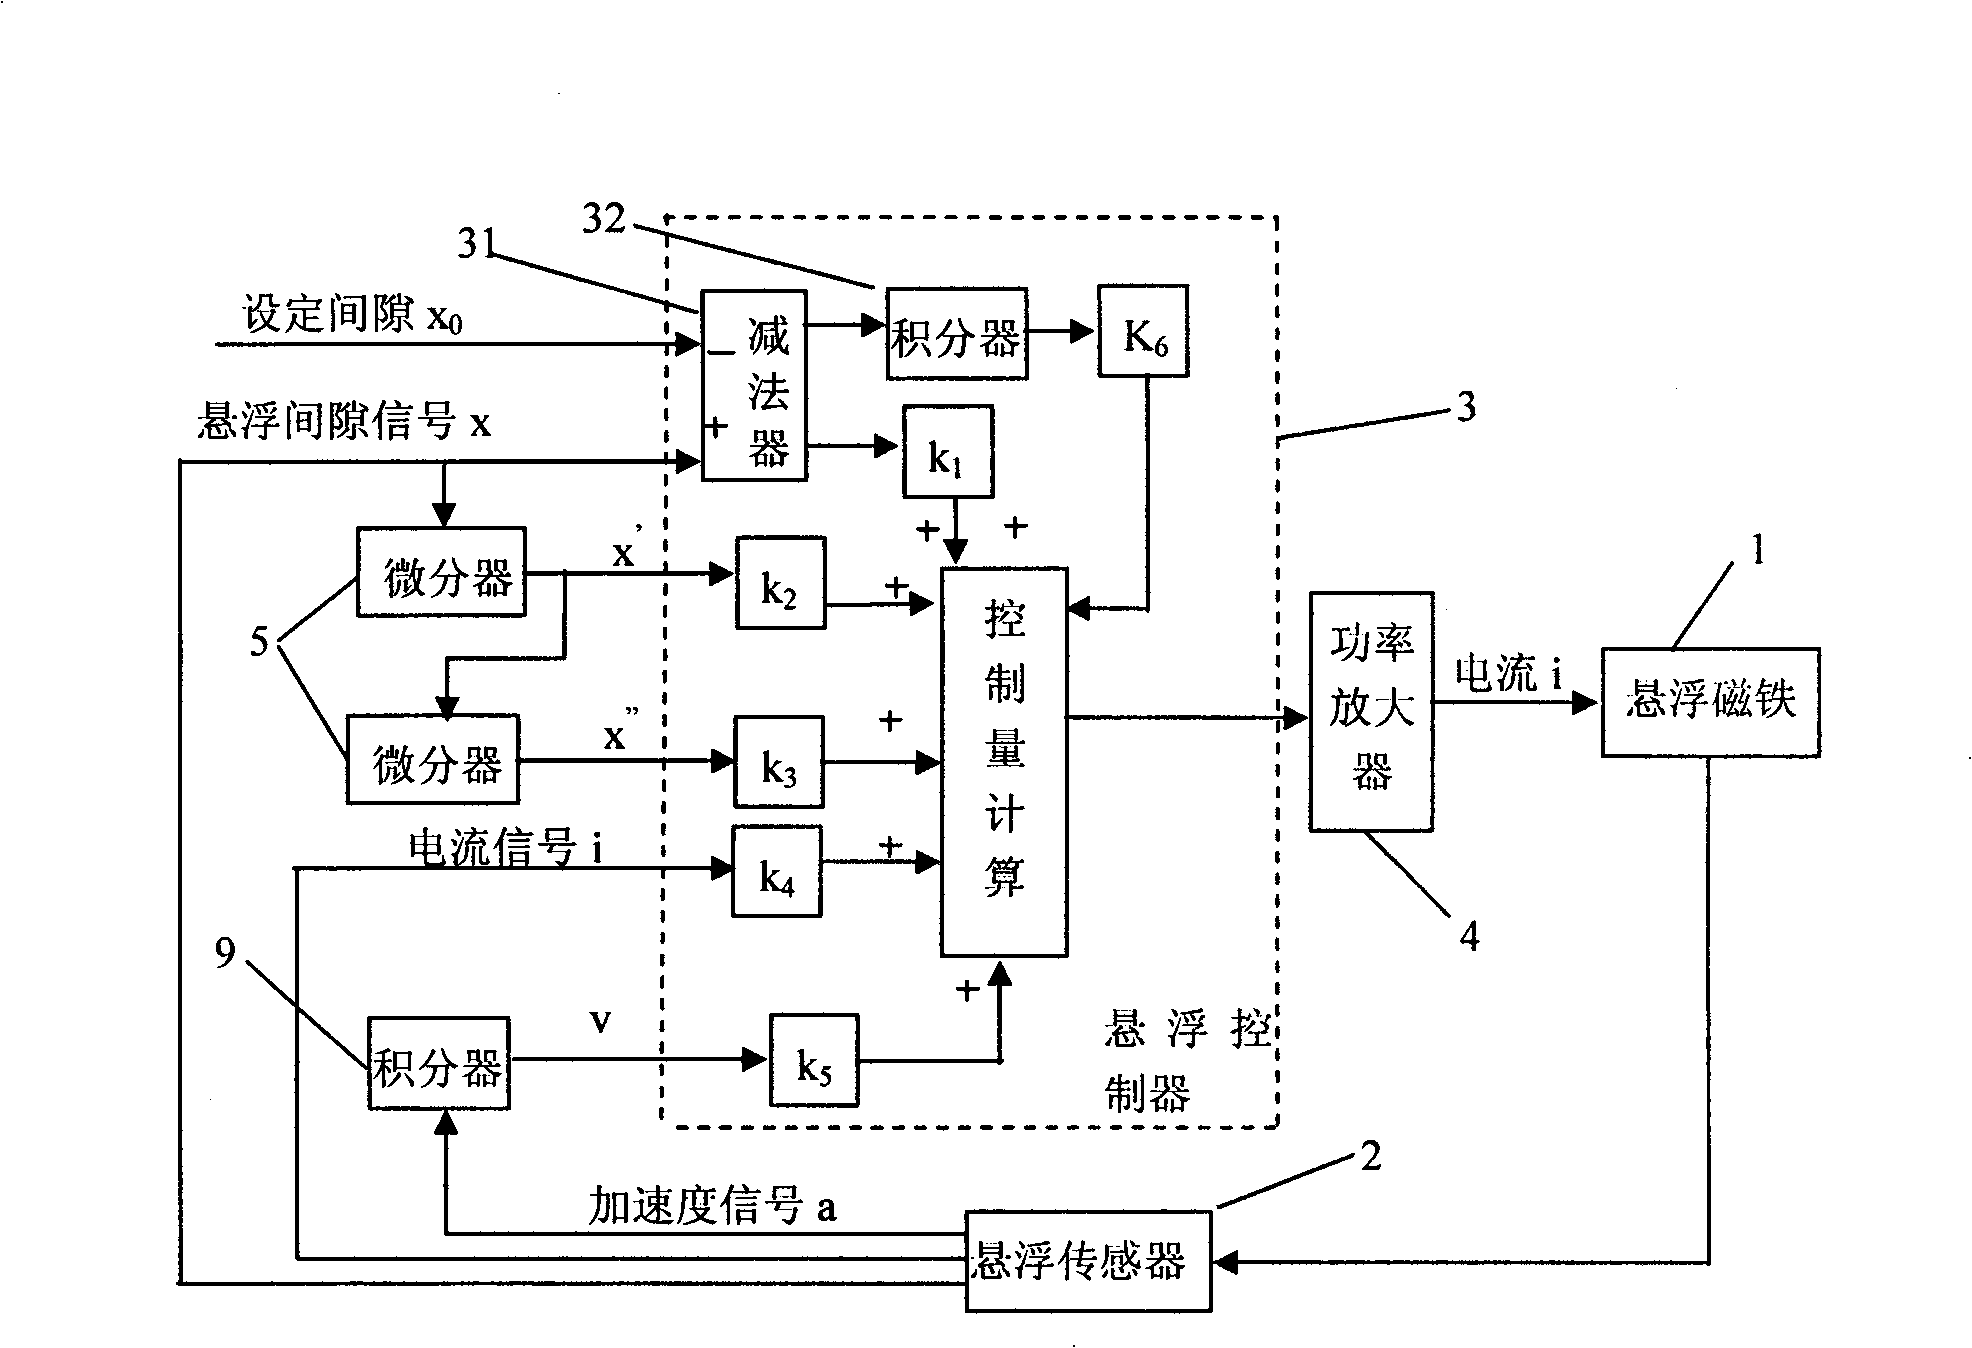 Method for inhibiting maglev train suspending system track coupled vibrations and control unit